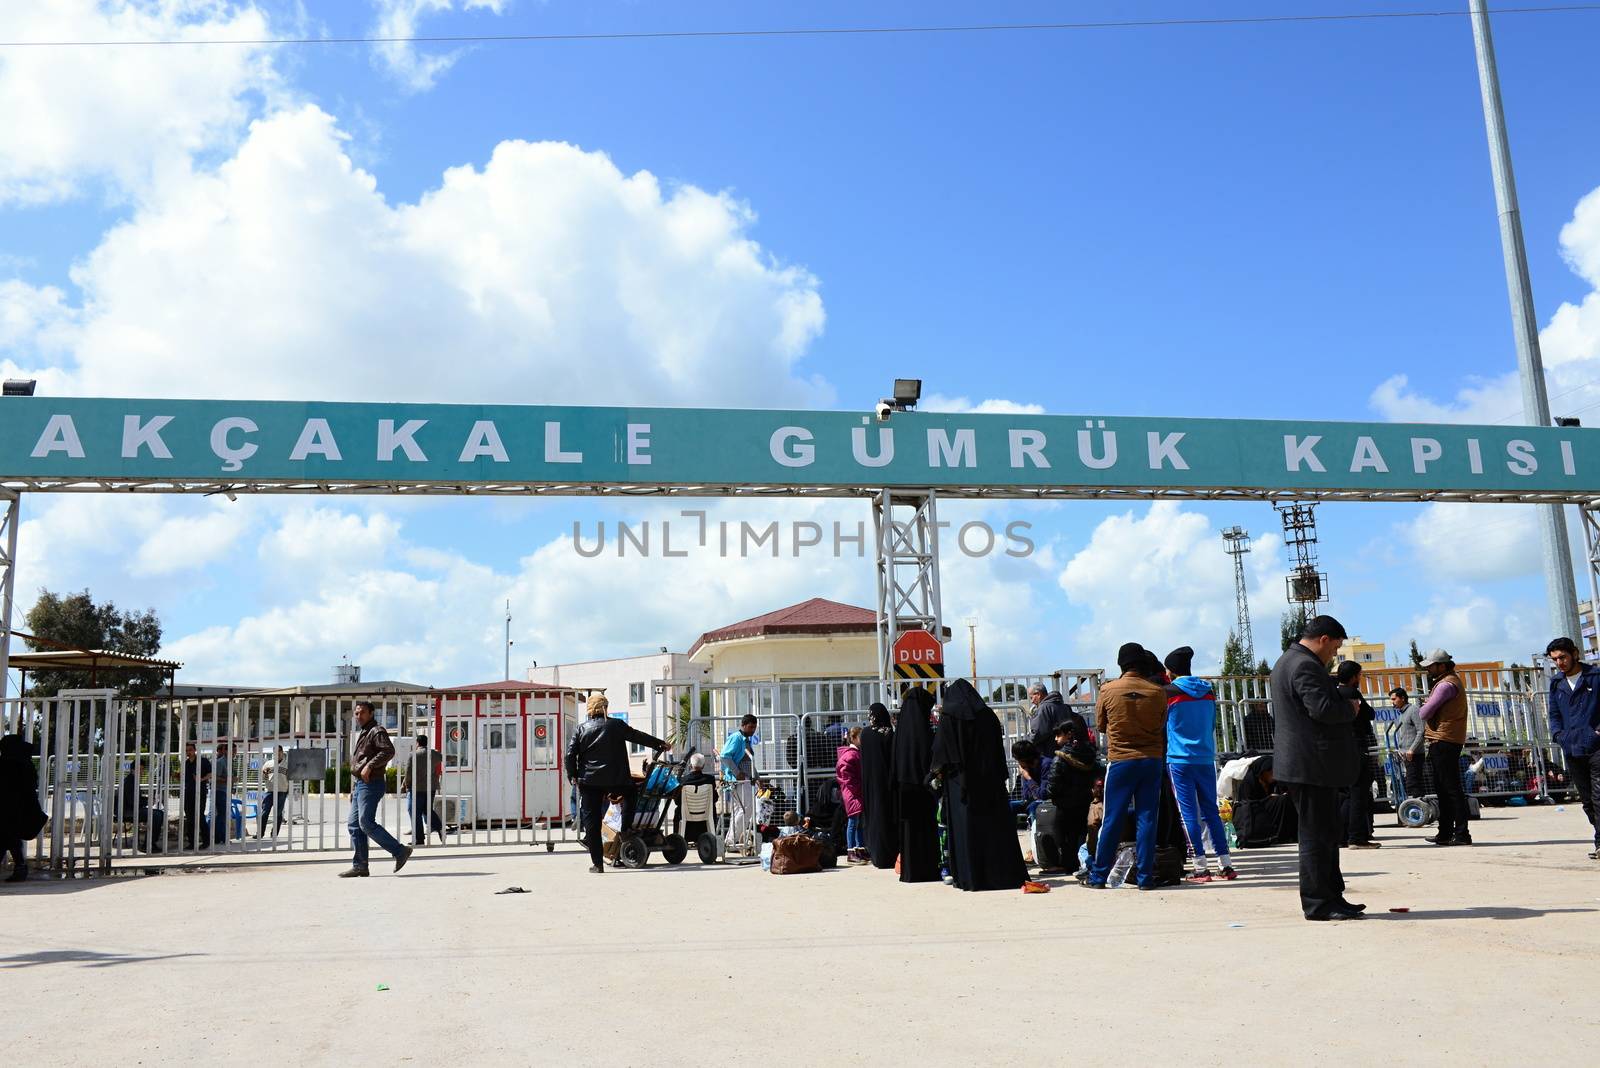 Border gate in Akcekale. On syrian sode of the border is area under Ismalmic state control. 31.3.2015 Akcakale, Turkey